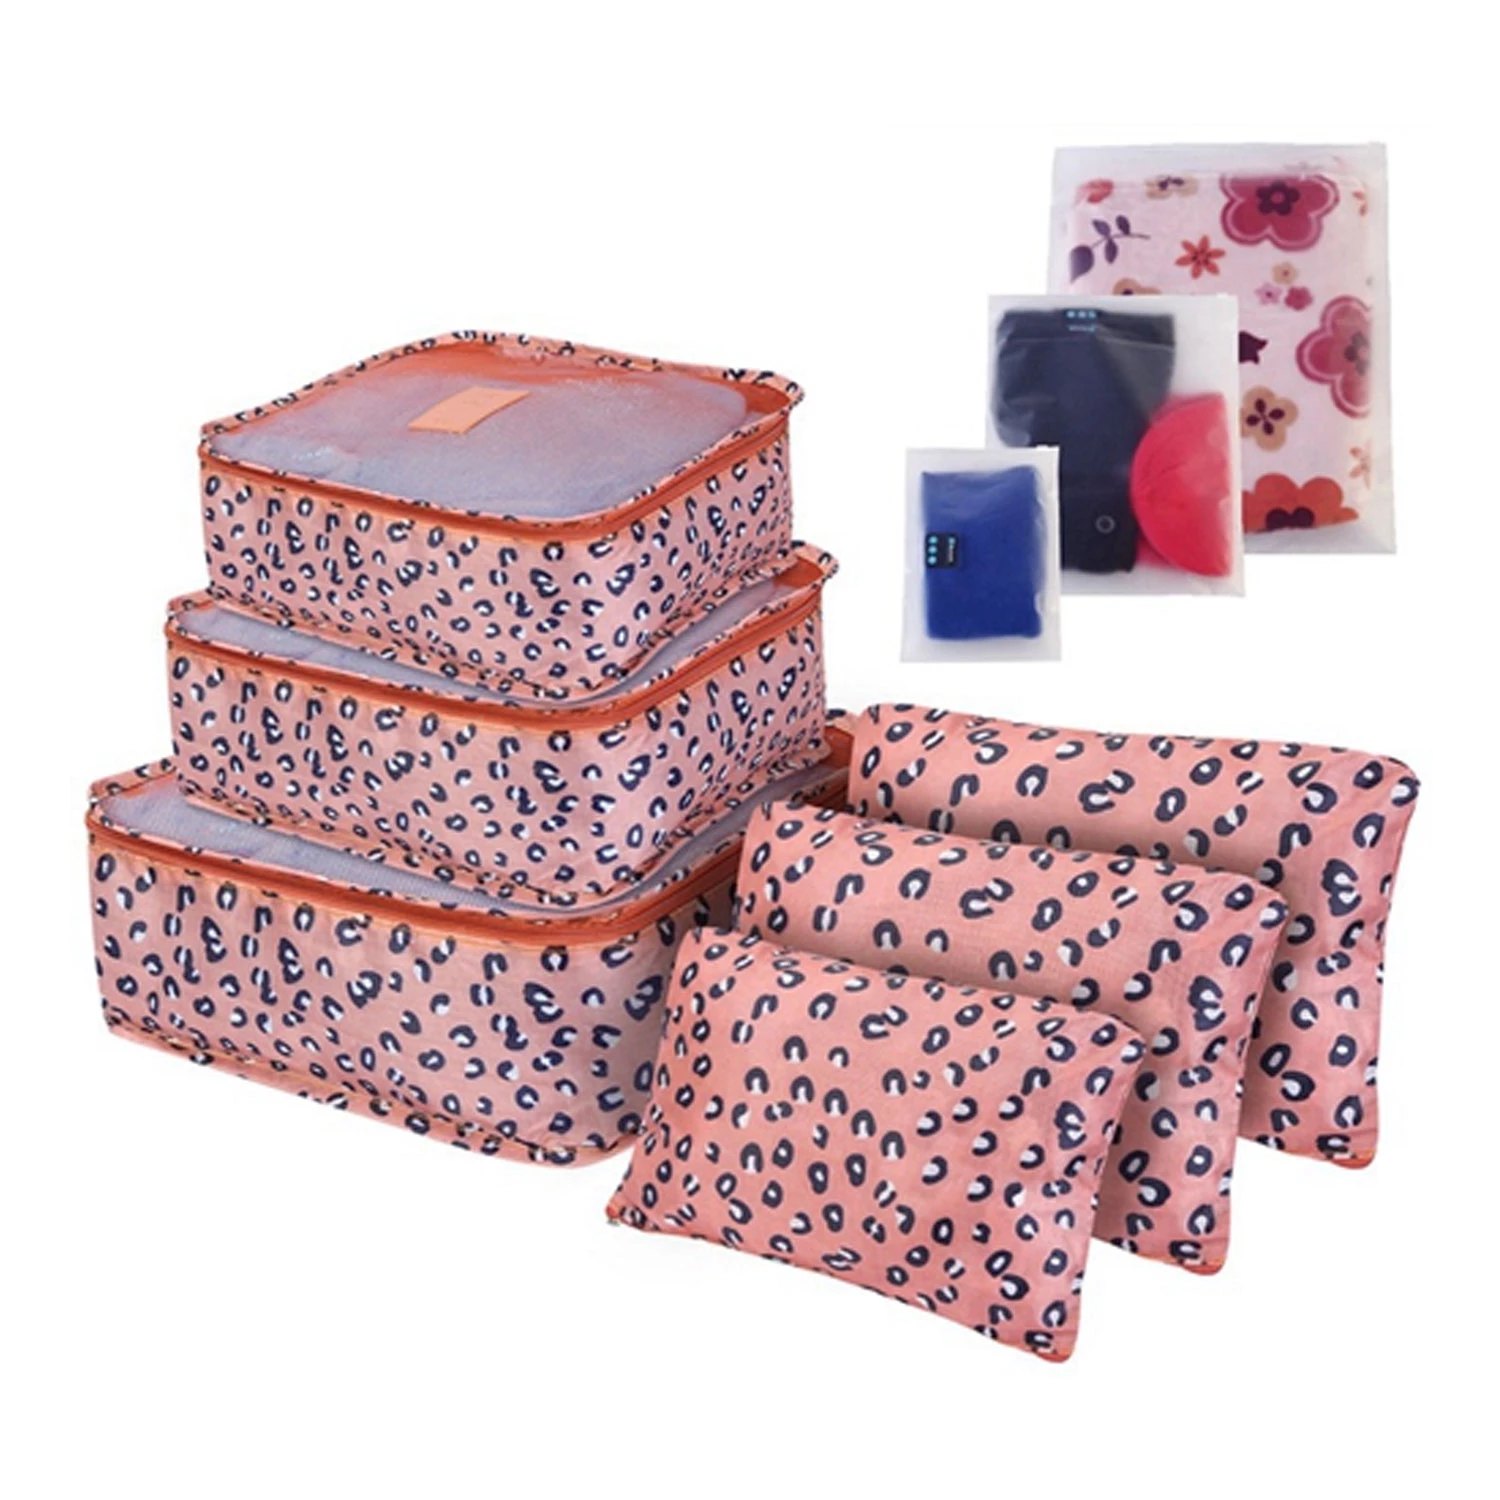 9pcs Clothes Storage Bags Water Resistant Travel Luggage Organizer Clothing Packing Cubes For Blouse